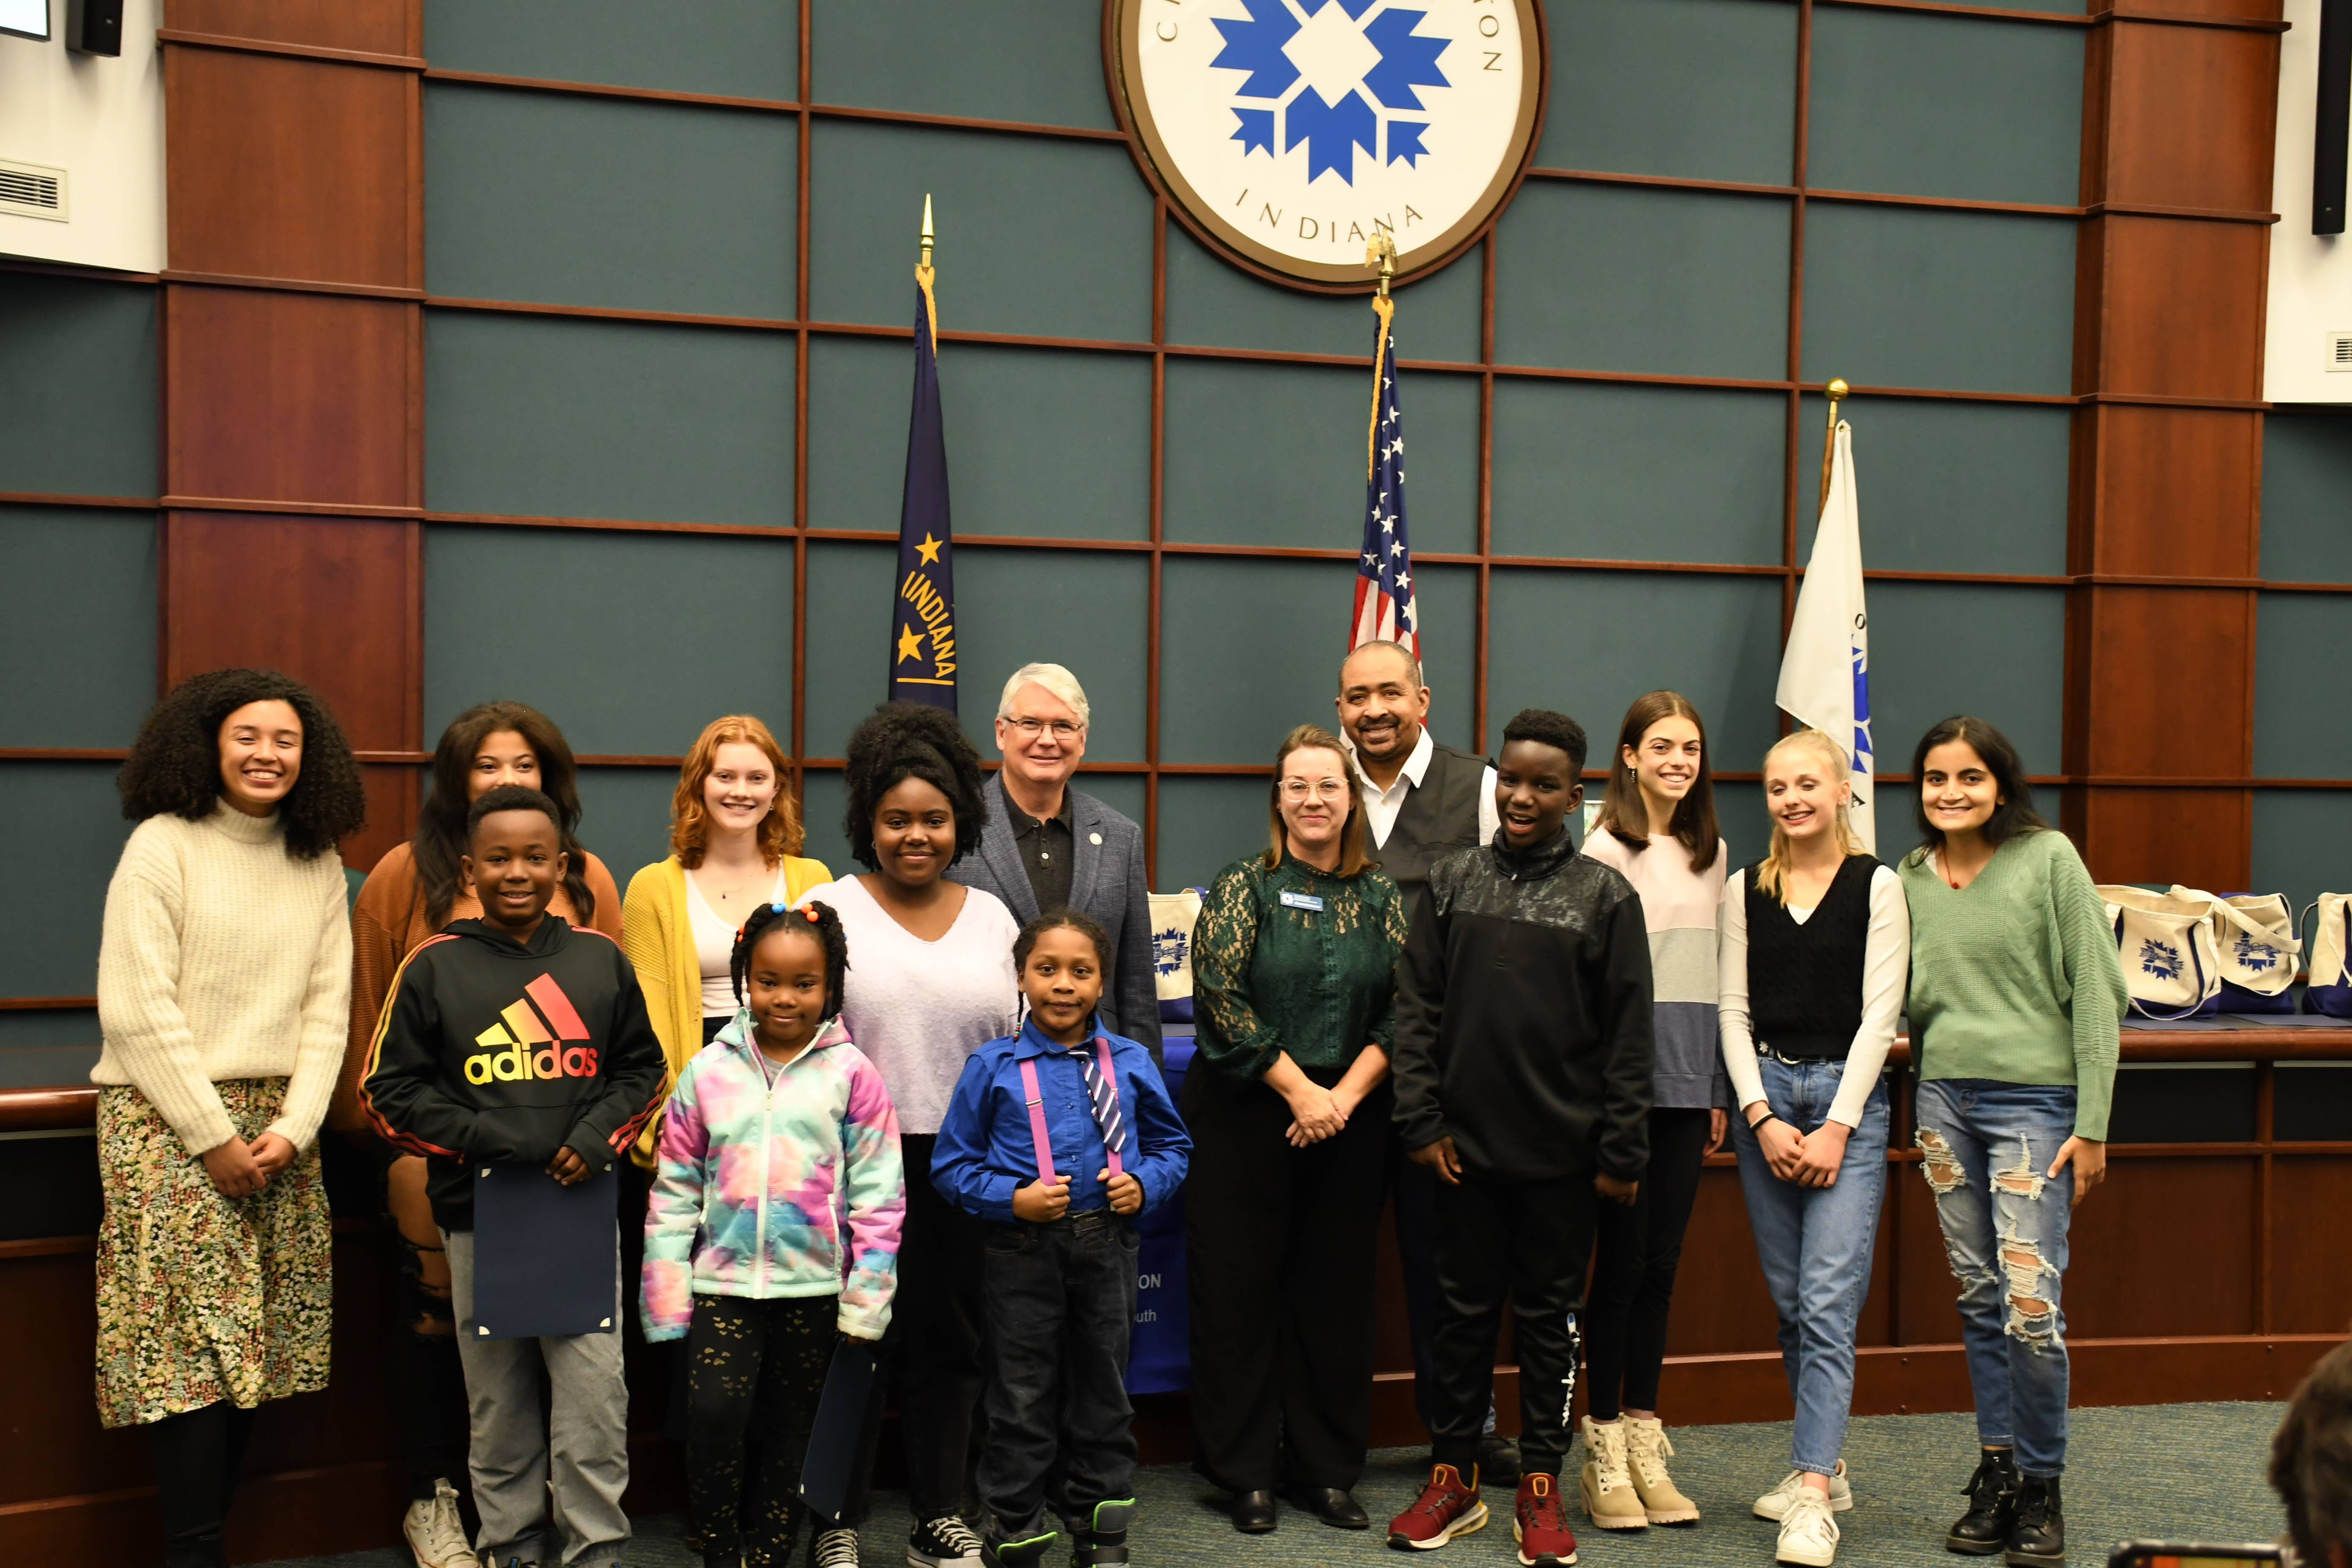 City of Bloomington Commission on the Status of Children and Youth Co-chairs Isadore Torry and Katie Rodriguez, Mayor John Hamilton, and this year's winners.